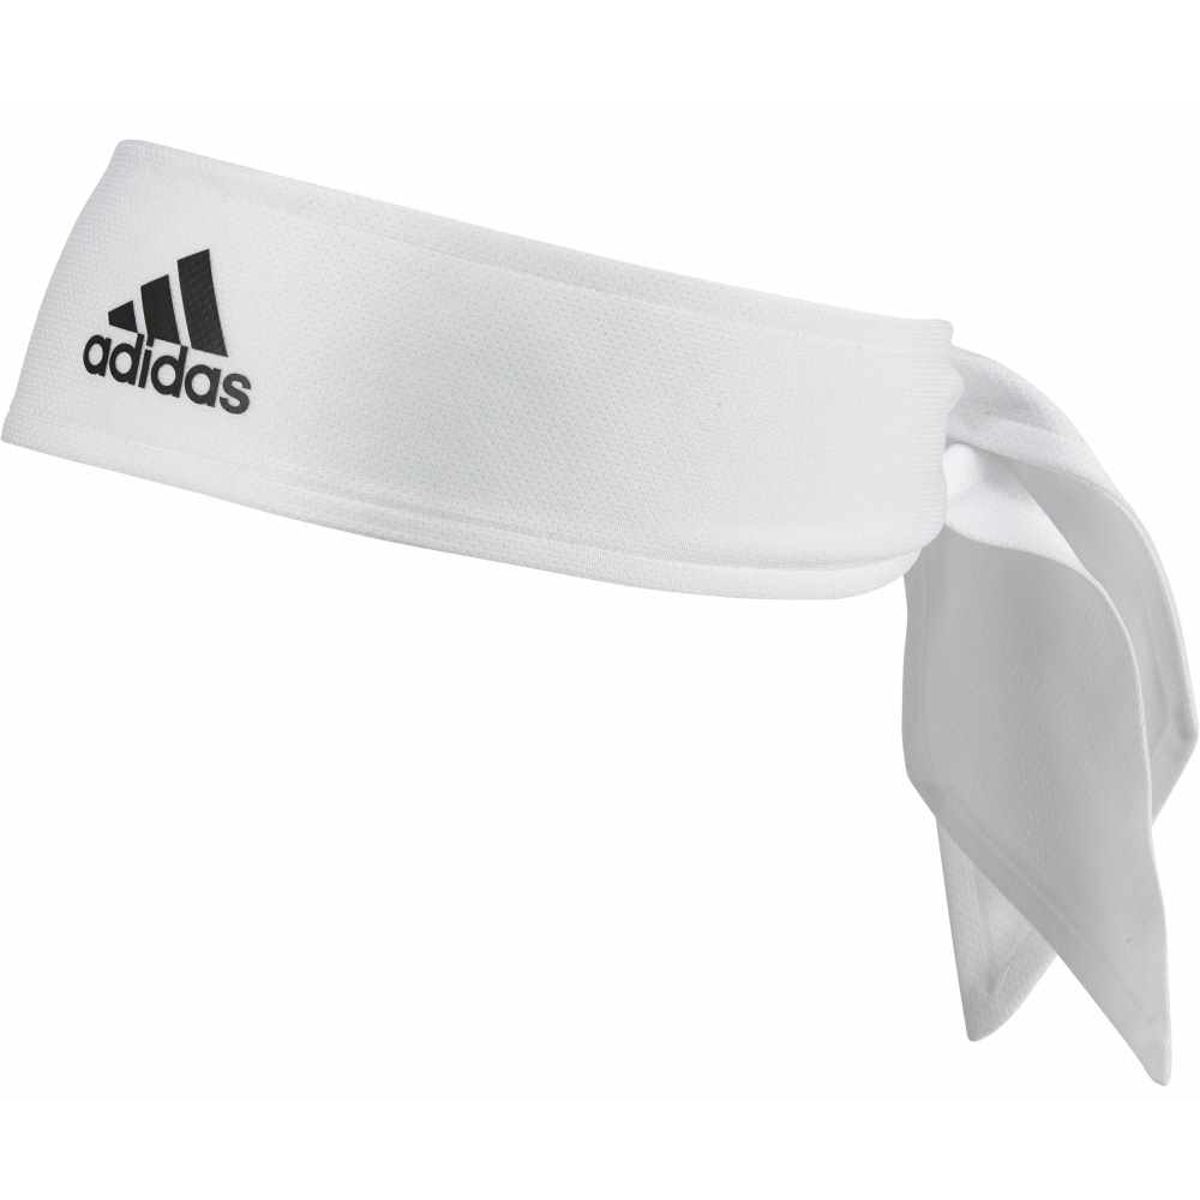 adidas Tennis Adult Tie Band S97908-adult